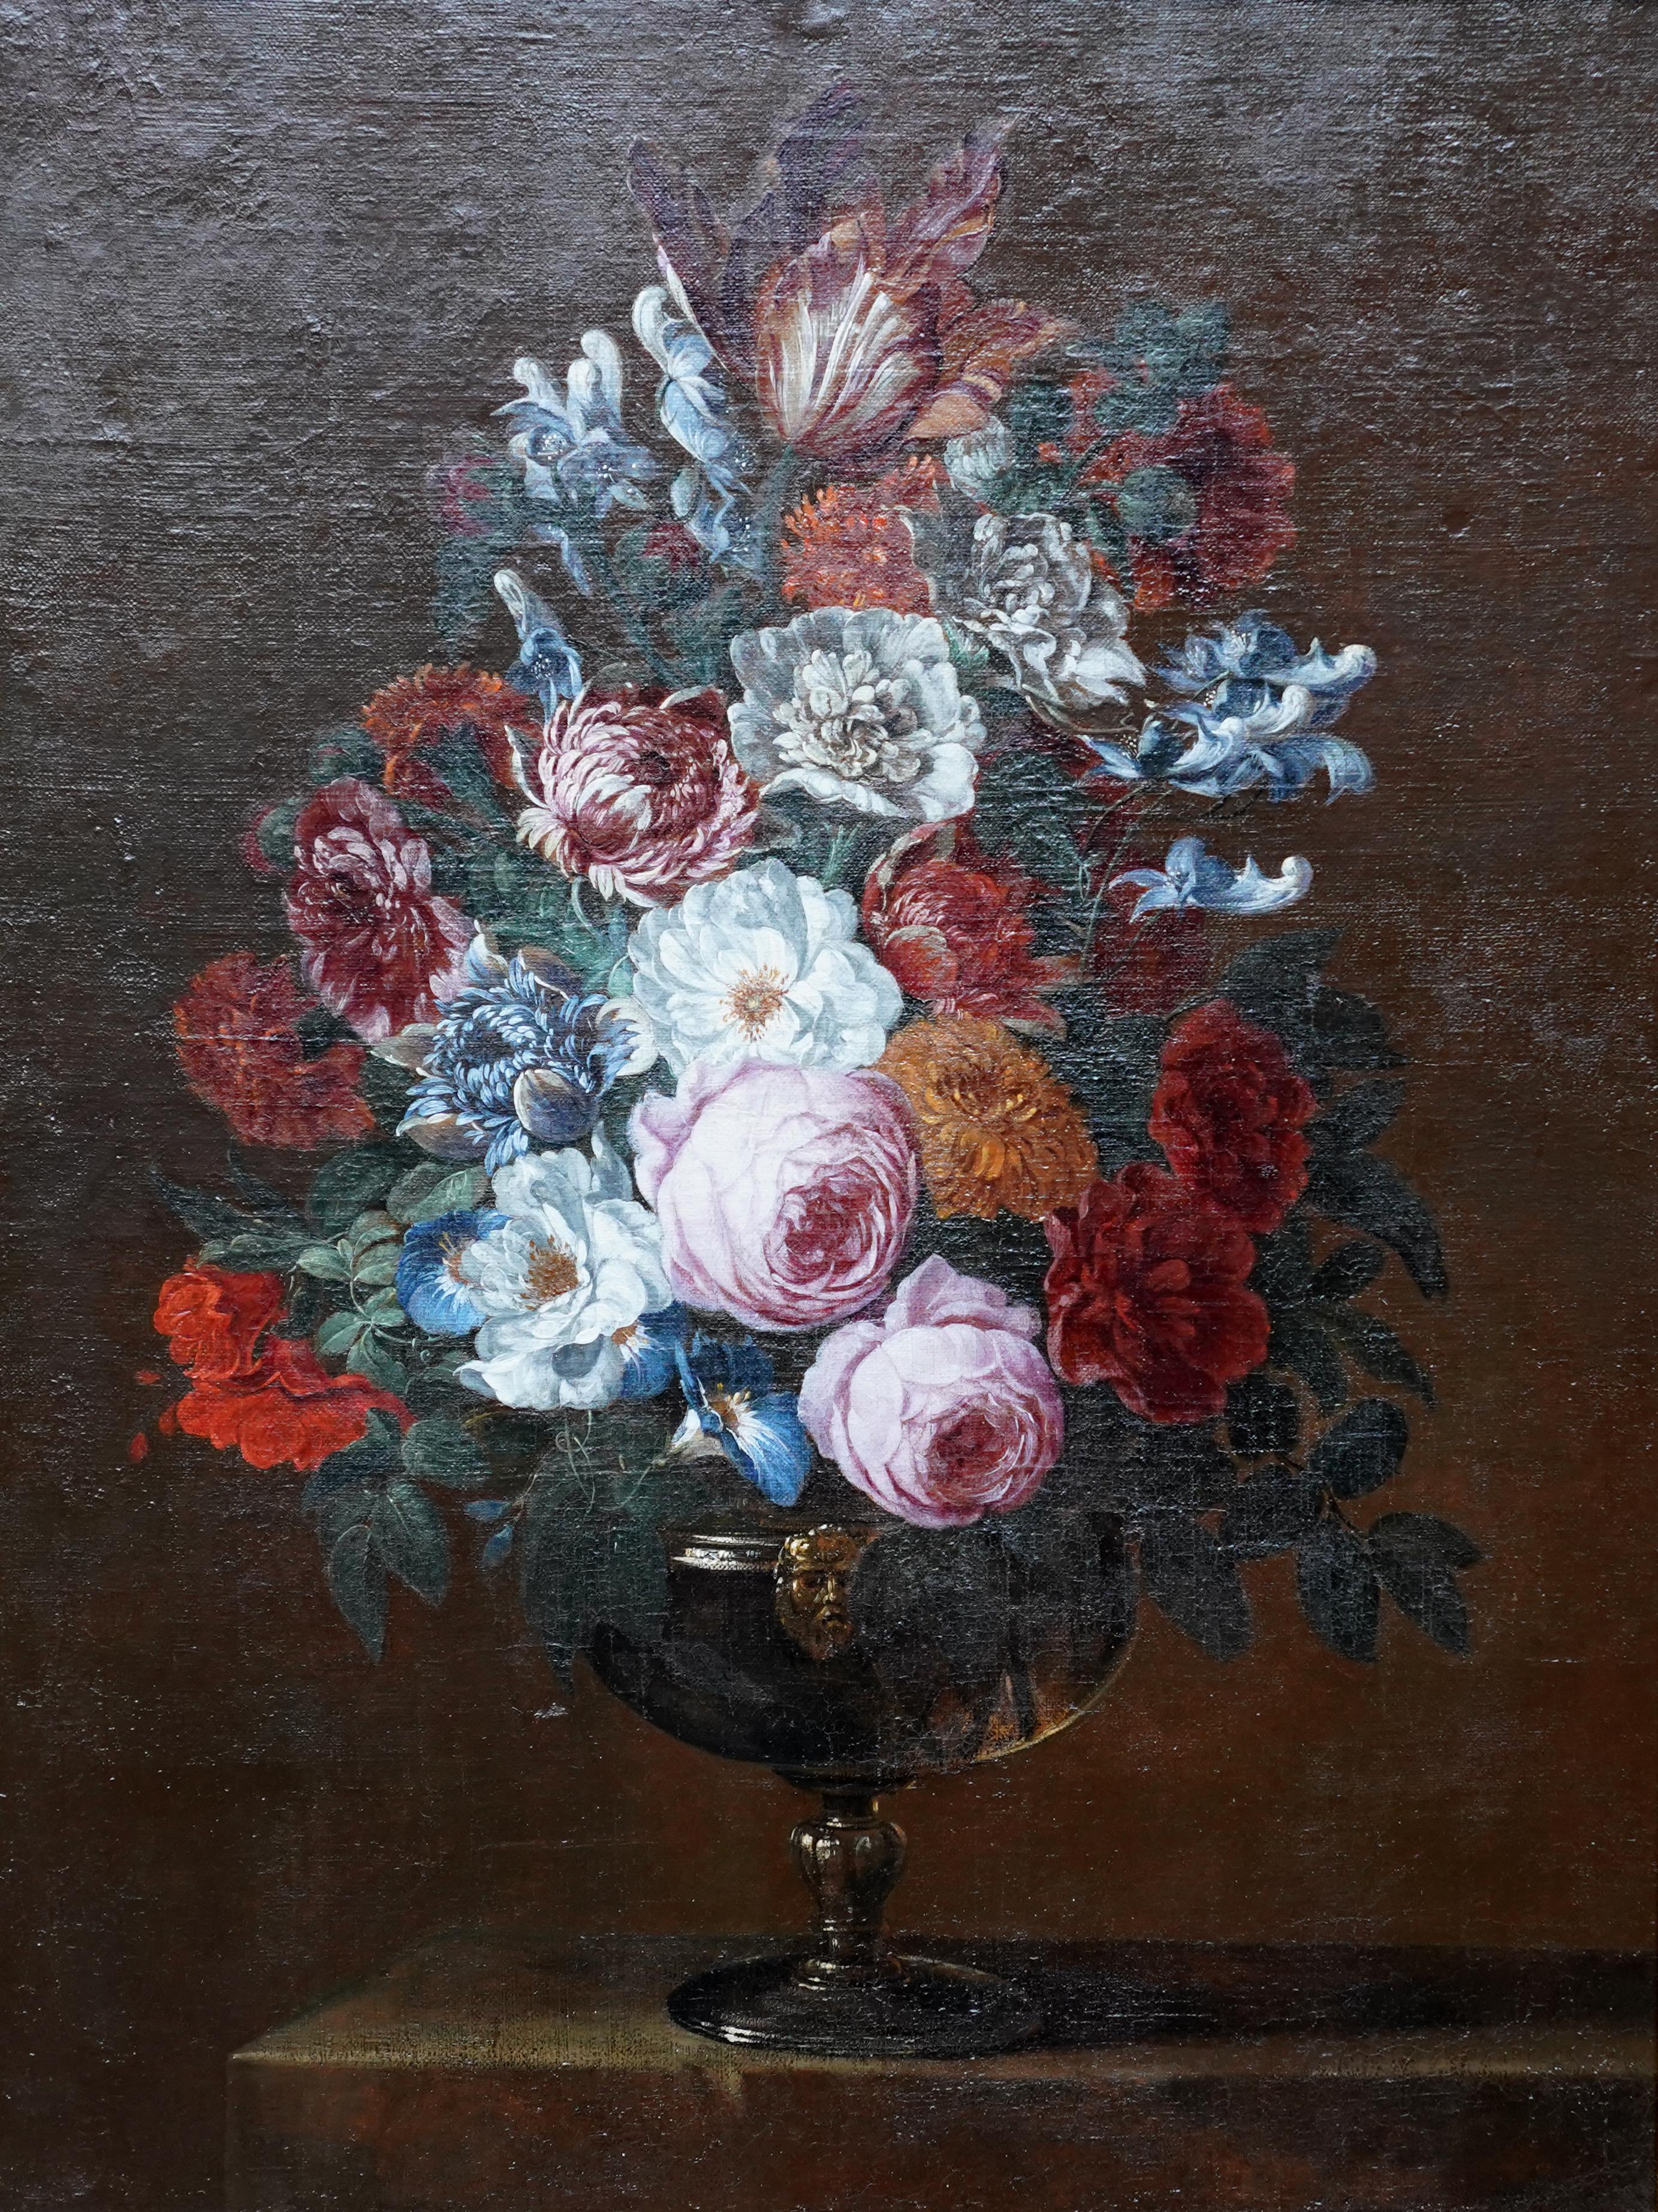 Floral Bouquet with Peonies -Dutch Golden Age art floral still life oil painting - Painting by Jan Van Huysum (follower)